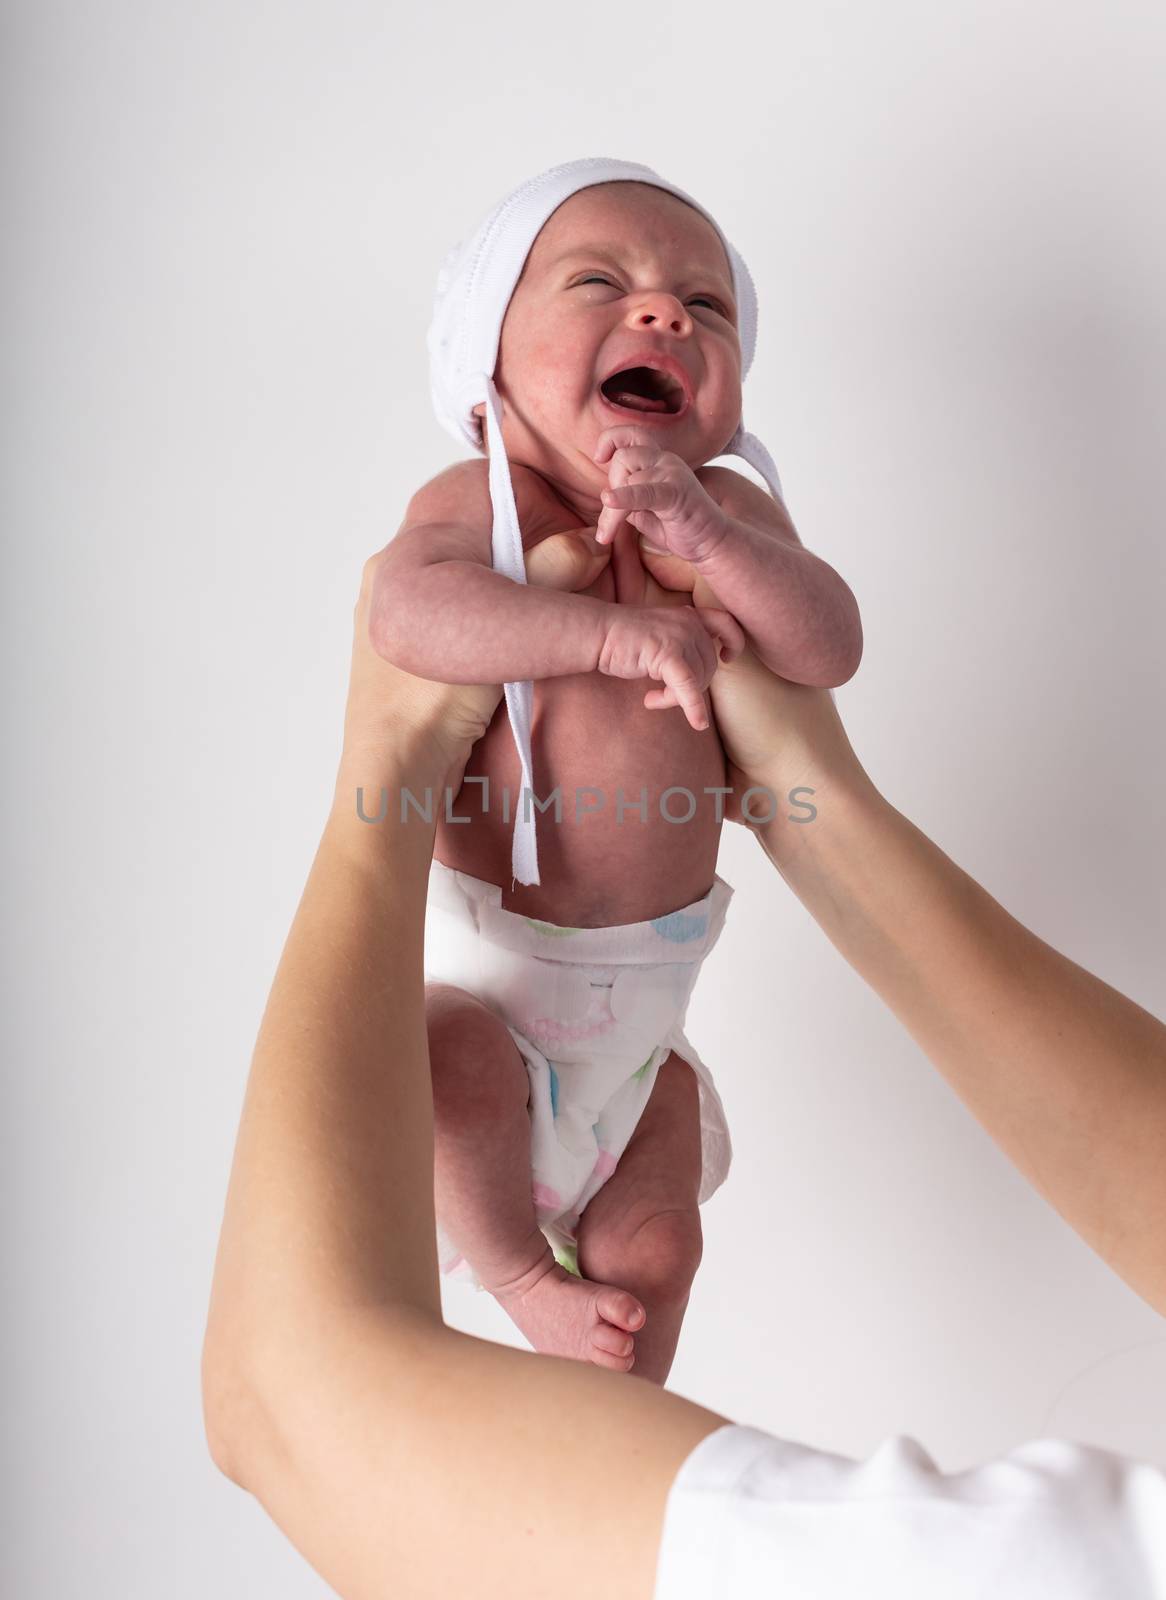 Portrait of a screaming newborn hold at hands, family, healthy birth concept photo, close up.